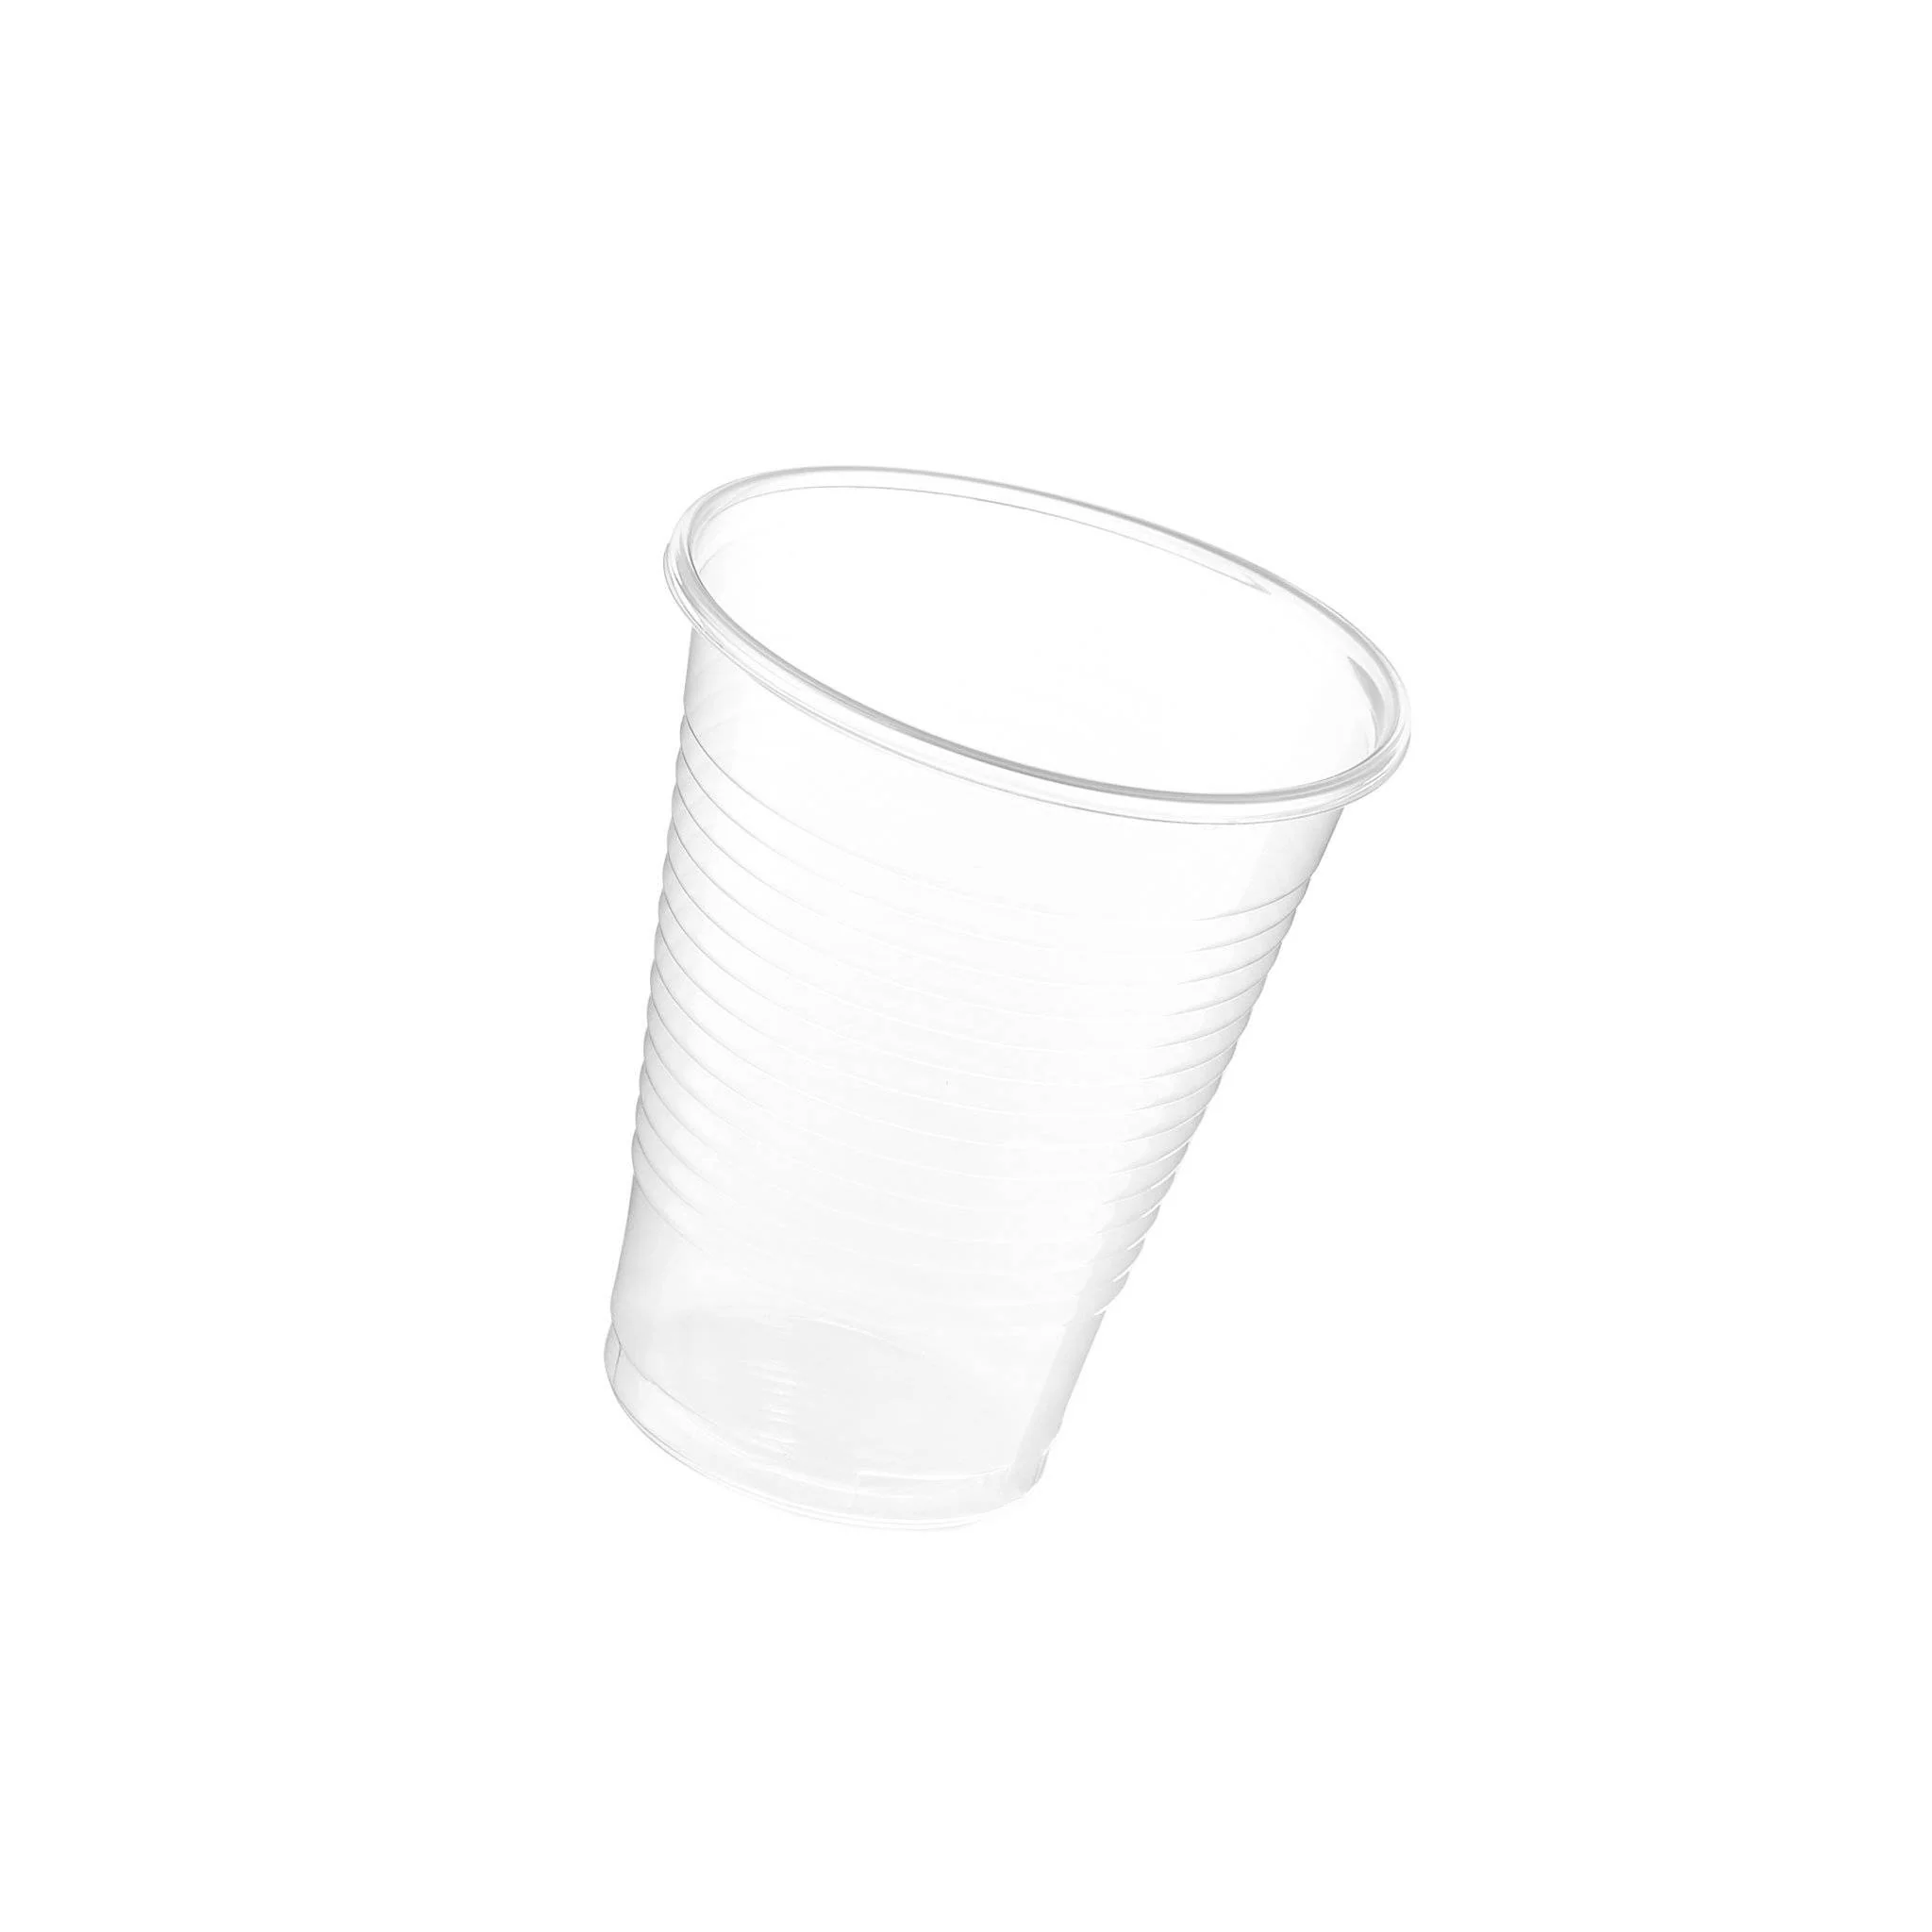 Comfy Package [Case of 2,000] 7 oz. Clear Disposable Plastic Cups - Cold  Party Drinking Cups